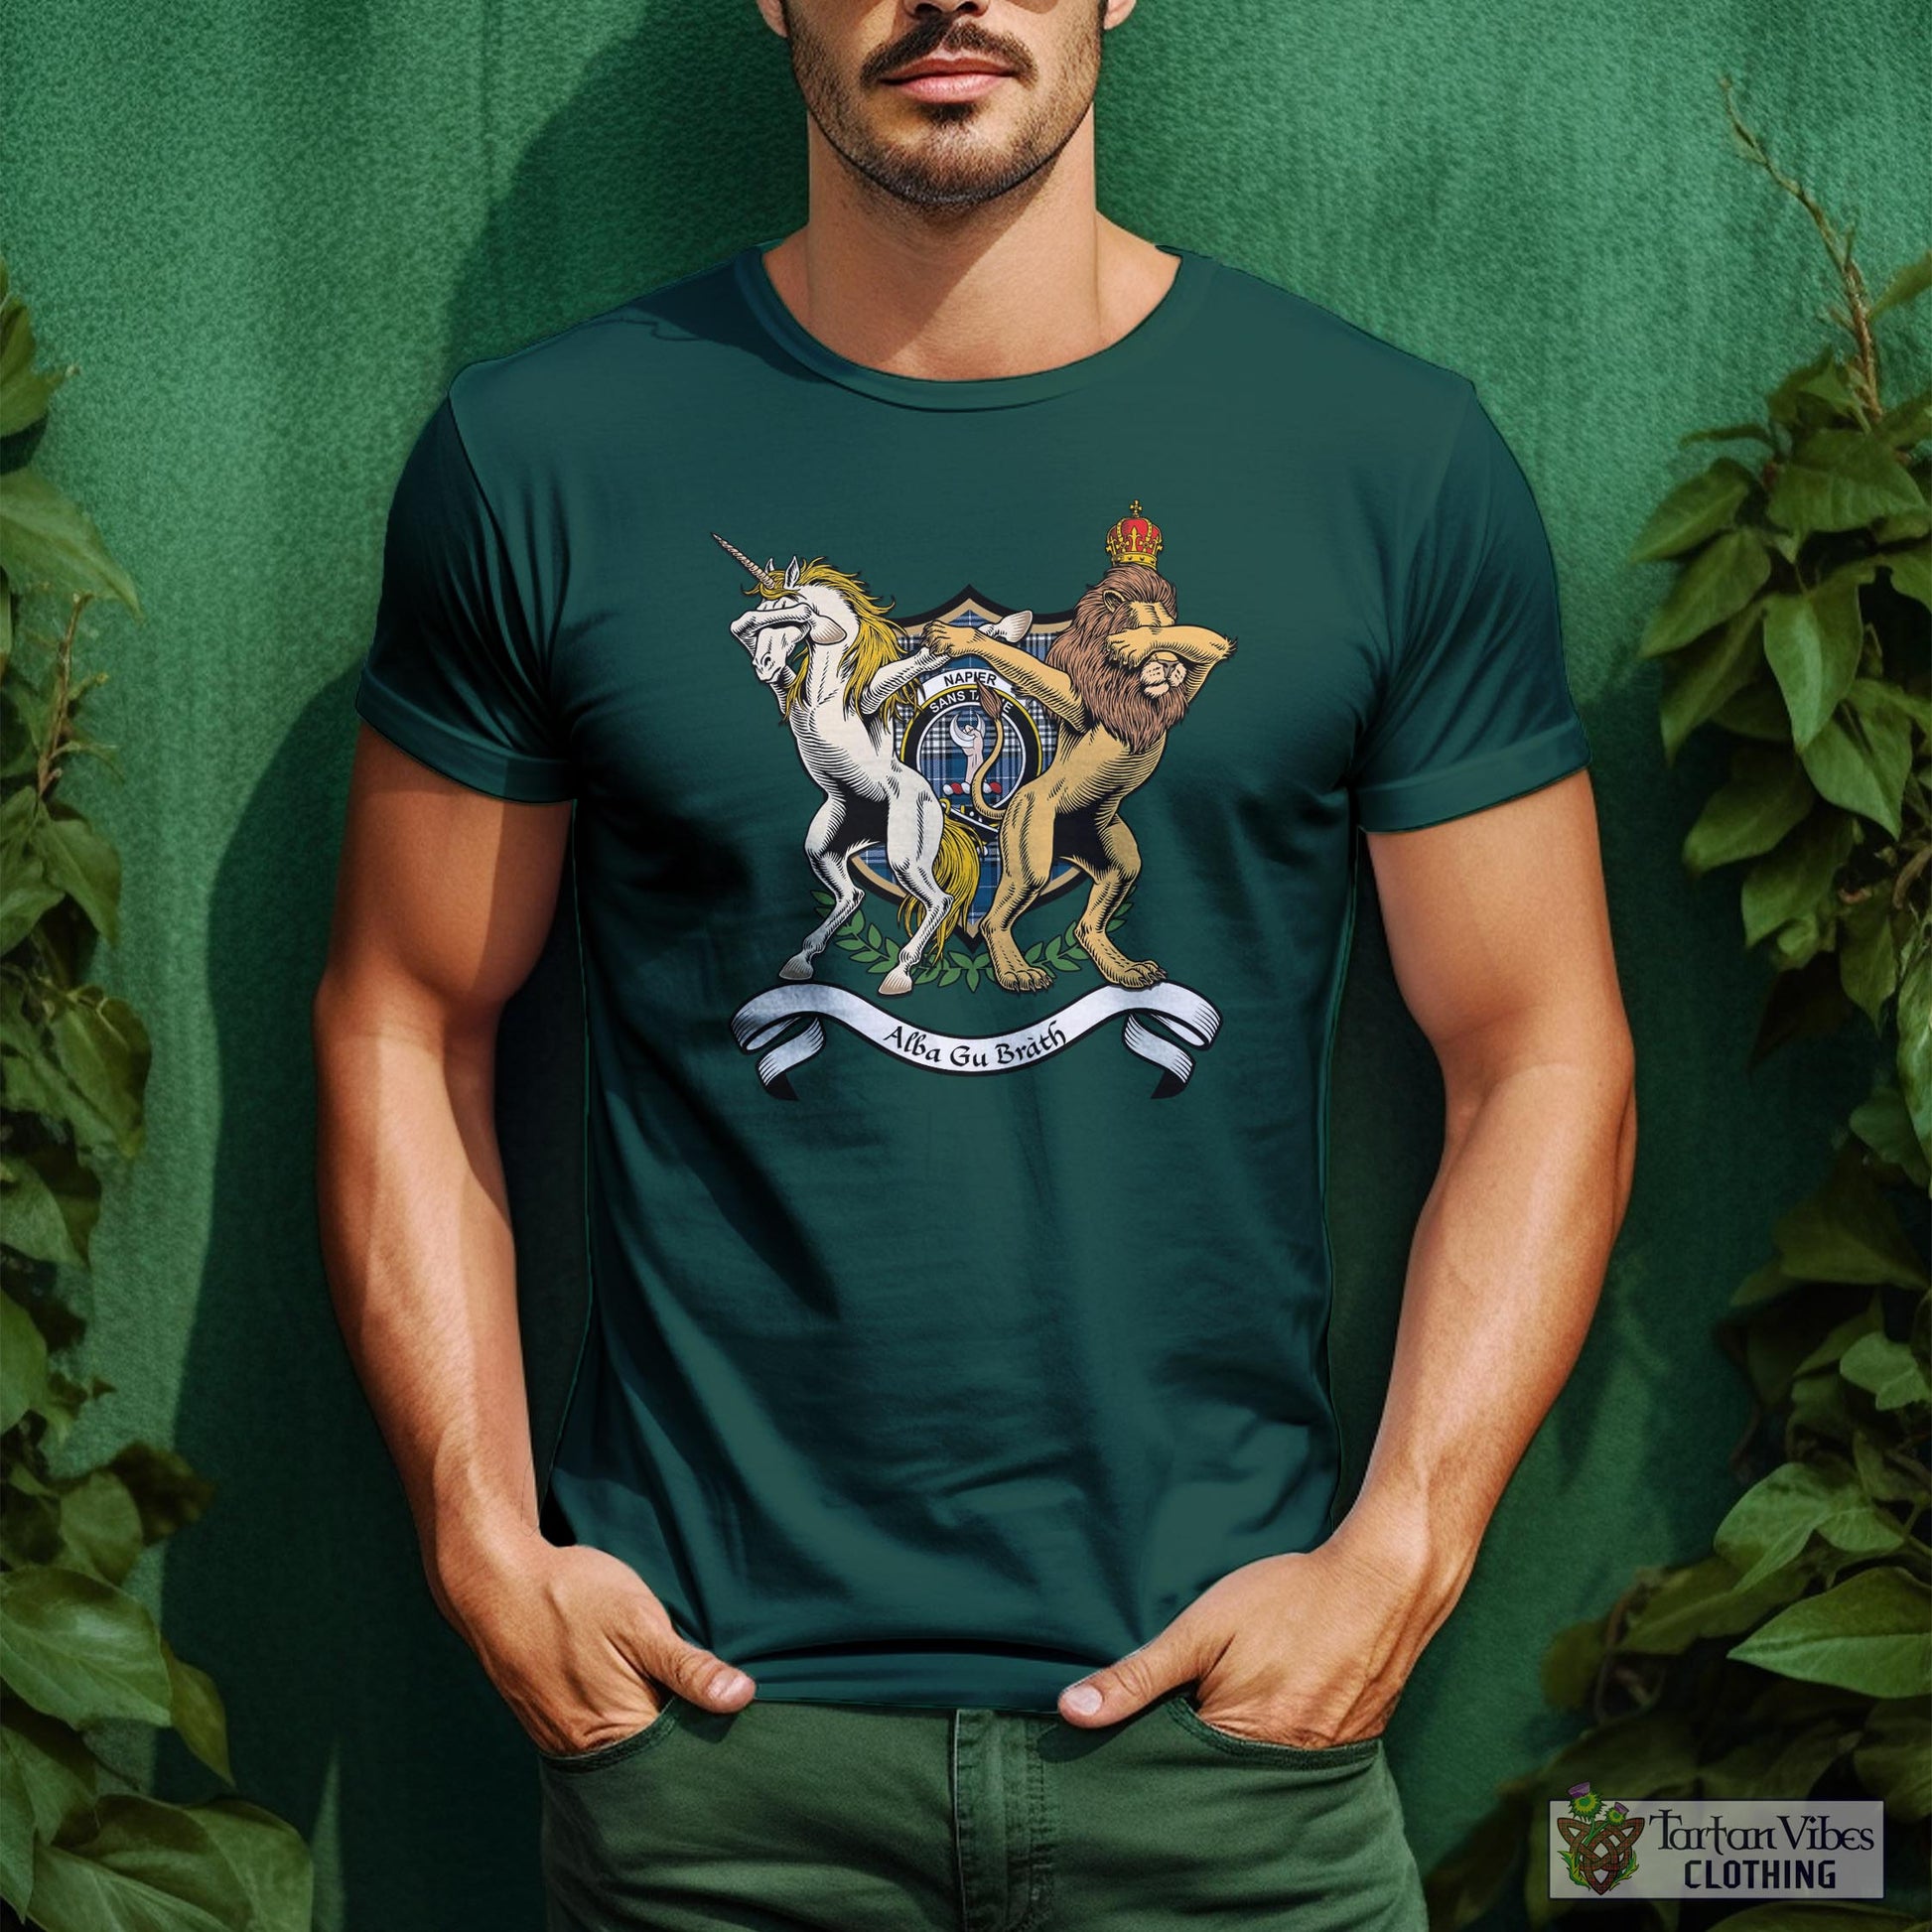 Tartan Vibes Clothing Napier Modern Family Crest Cotton Men's T-Shirt with Scotland Royal Coat Of Arm Funny Style